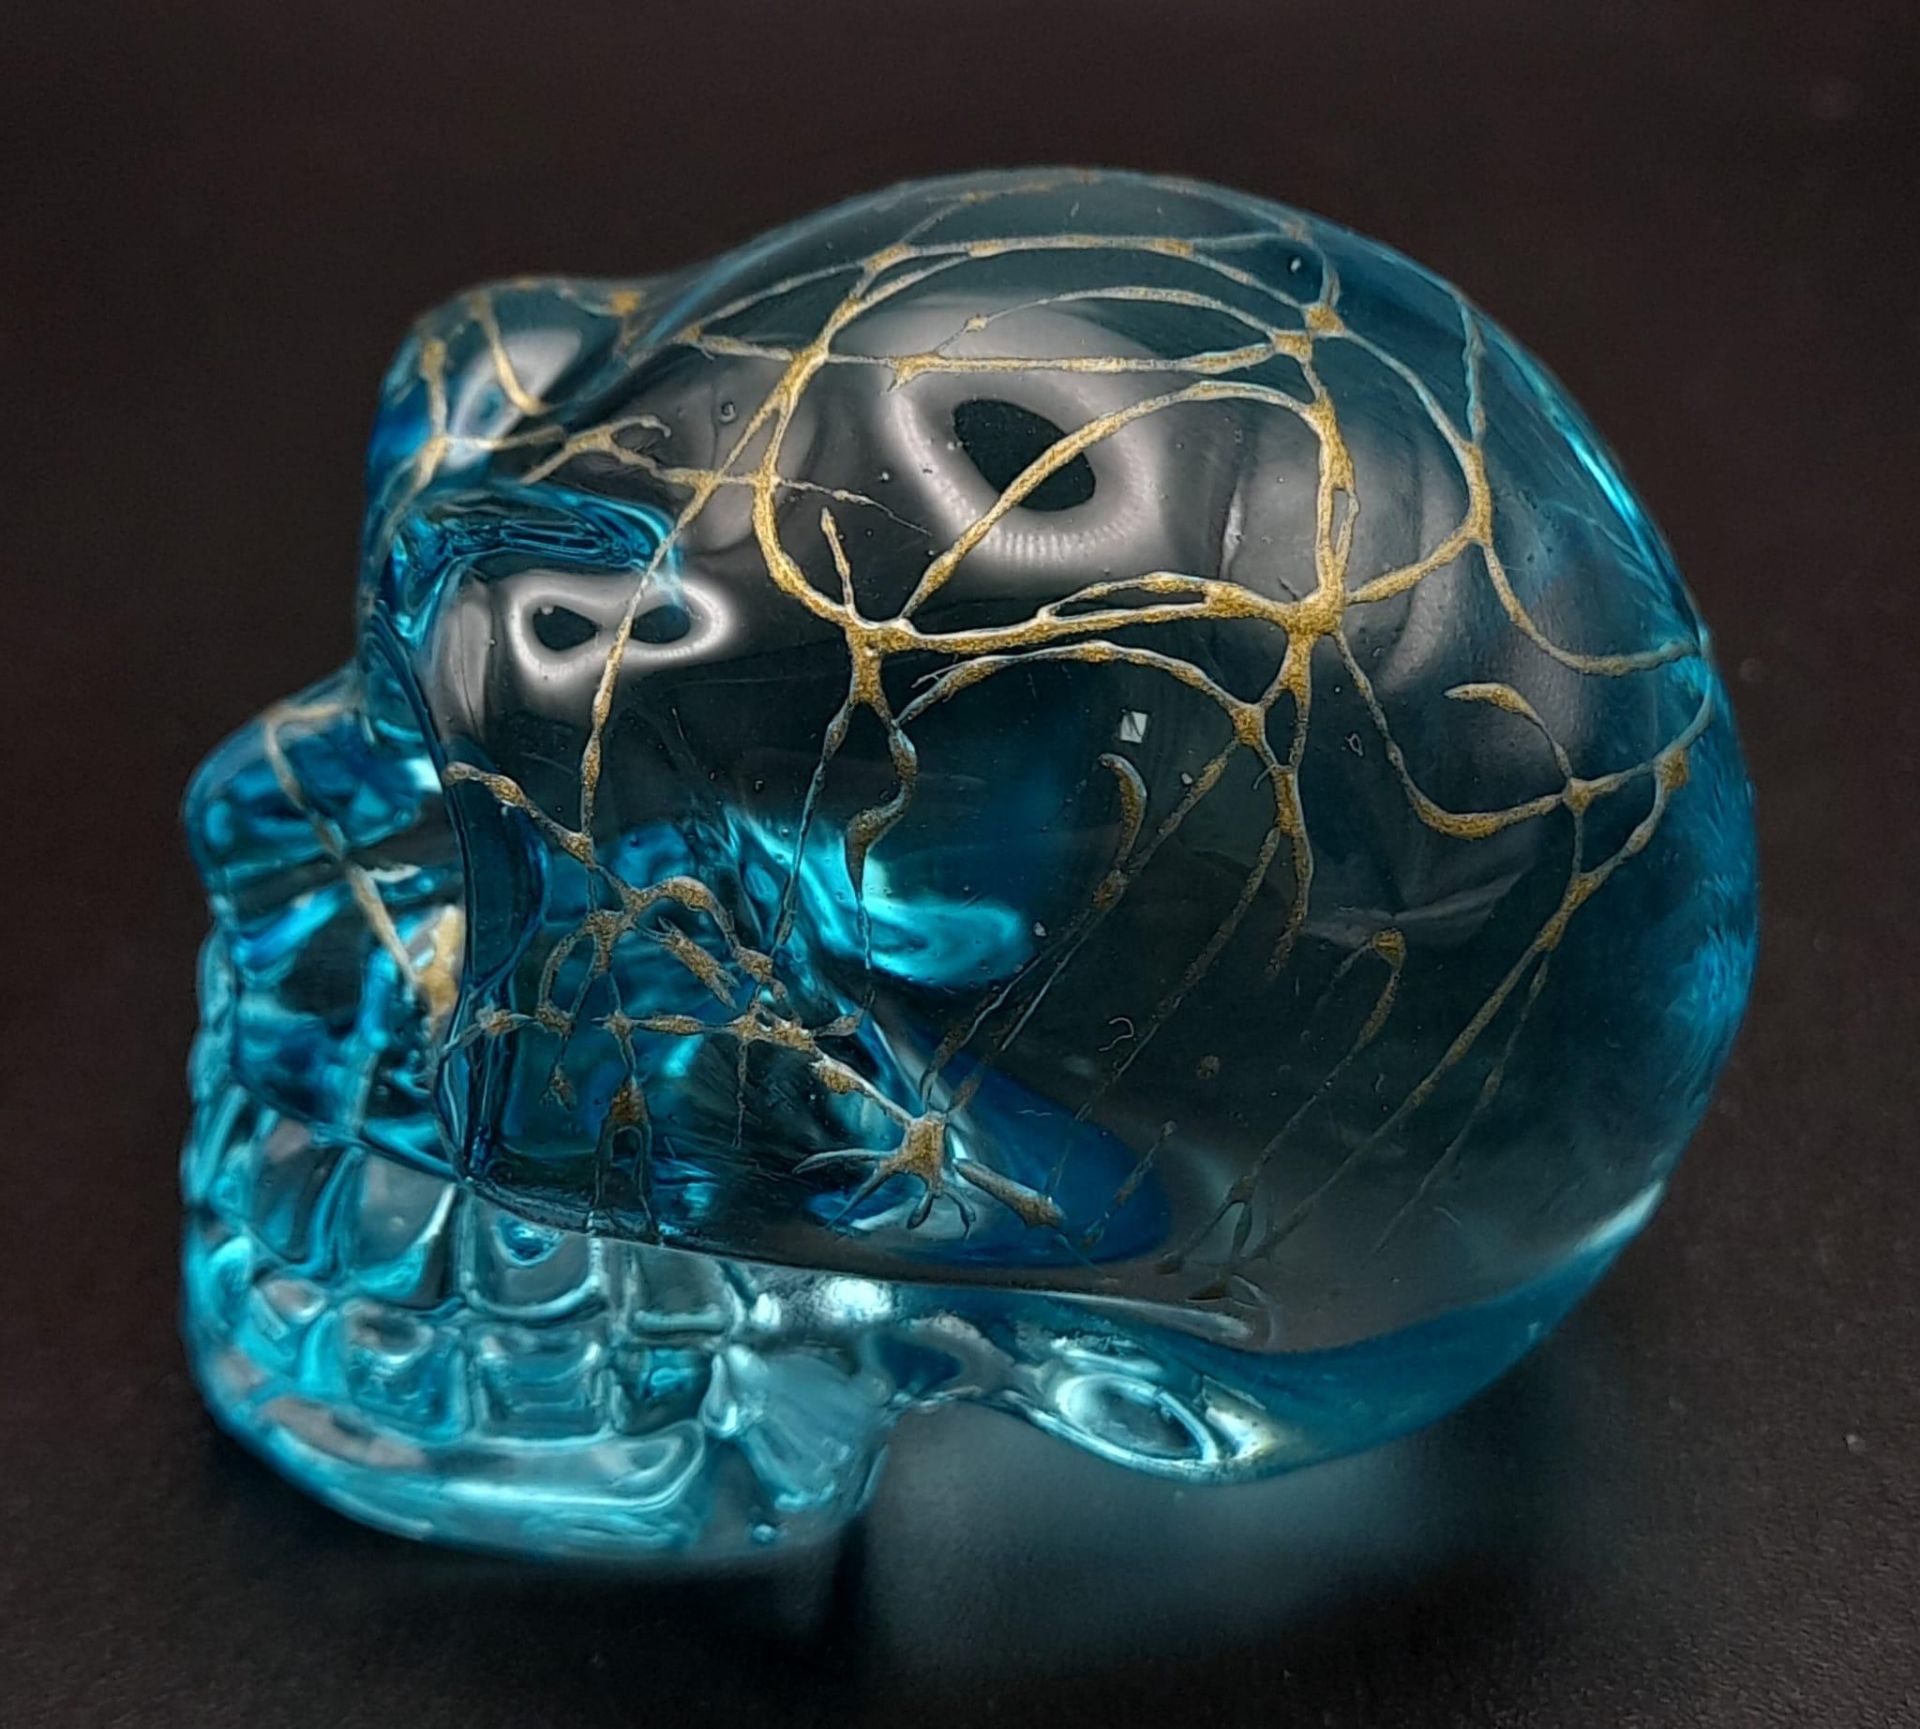 A Hand-Carved Blue Crystal Quartz Skull Figure. Paperweight or curiosity. %cm x 4cm - Image 2 of 5